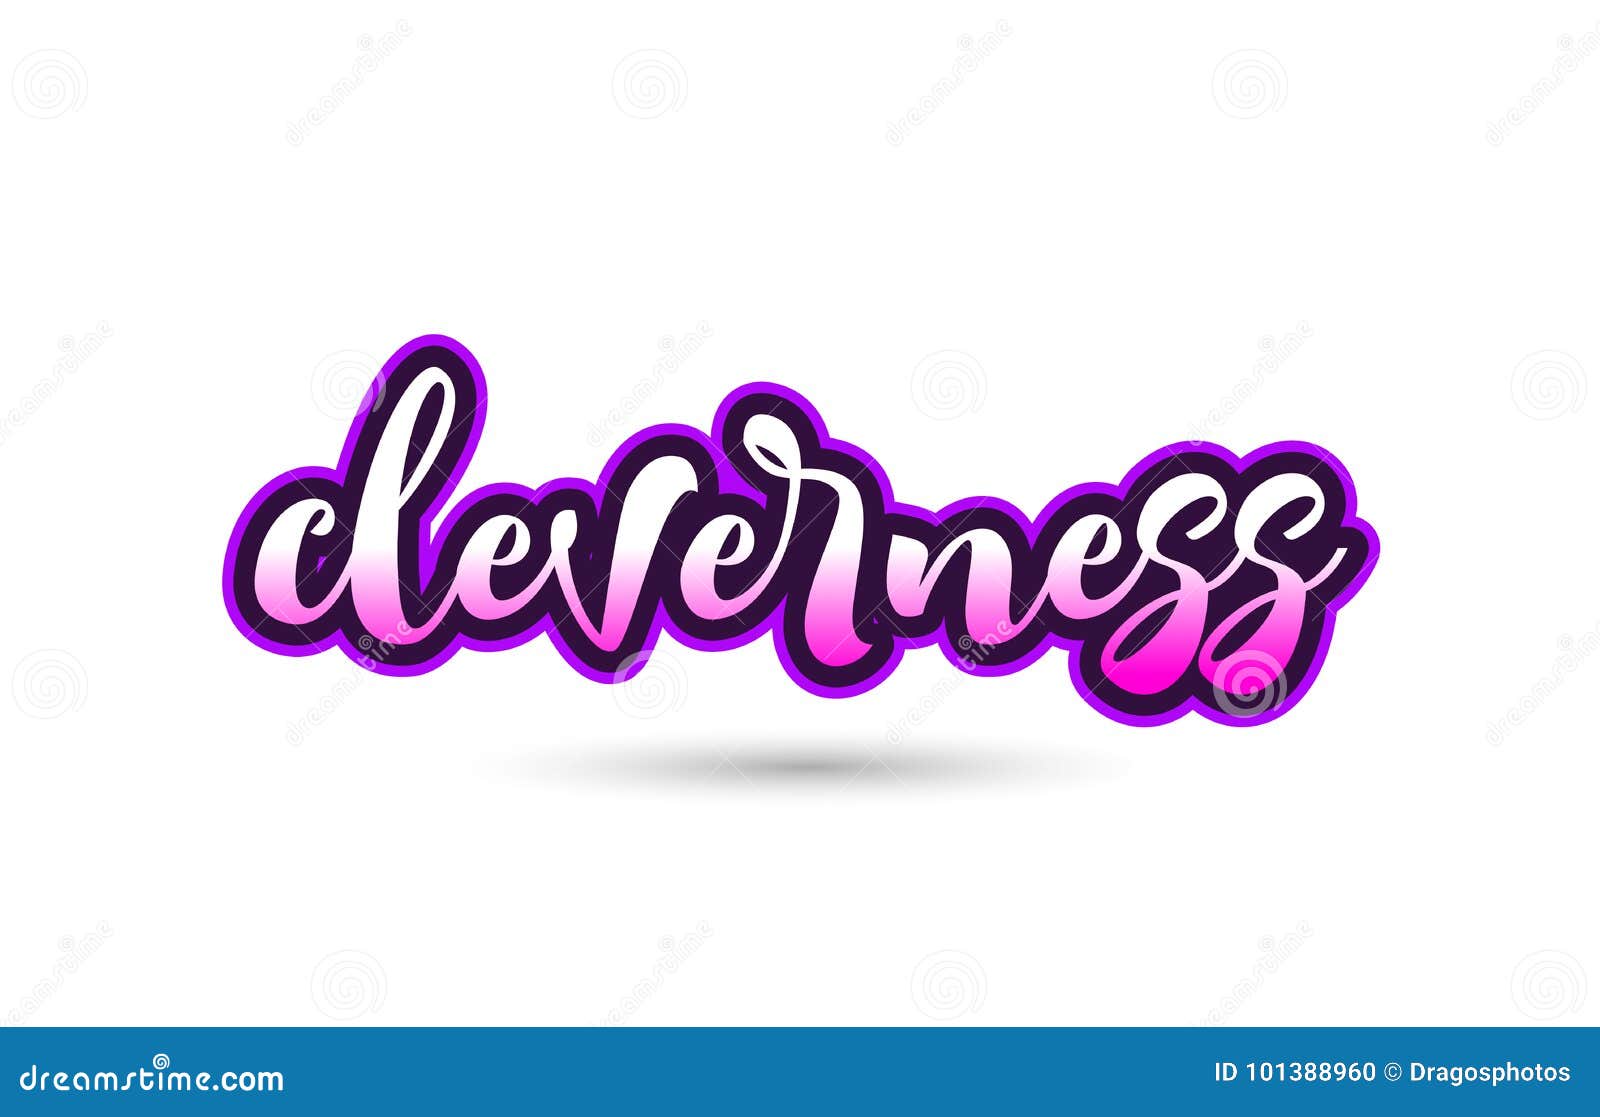 cleverness calligraphic pink font text logo icon typography 